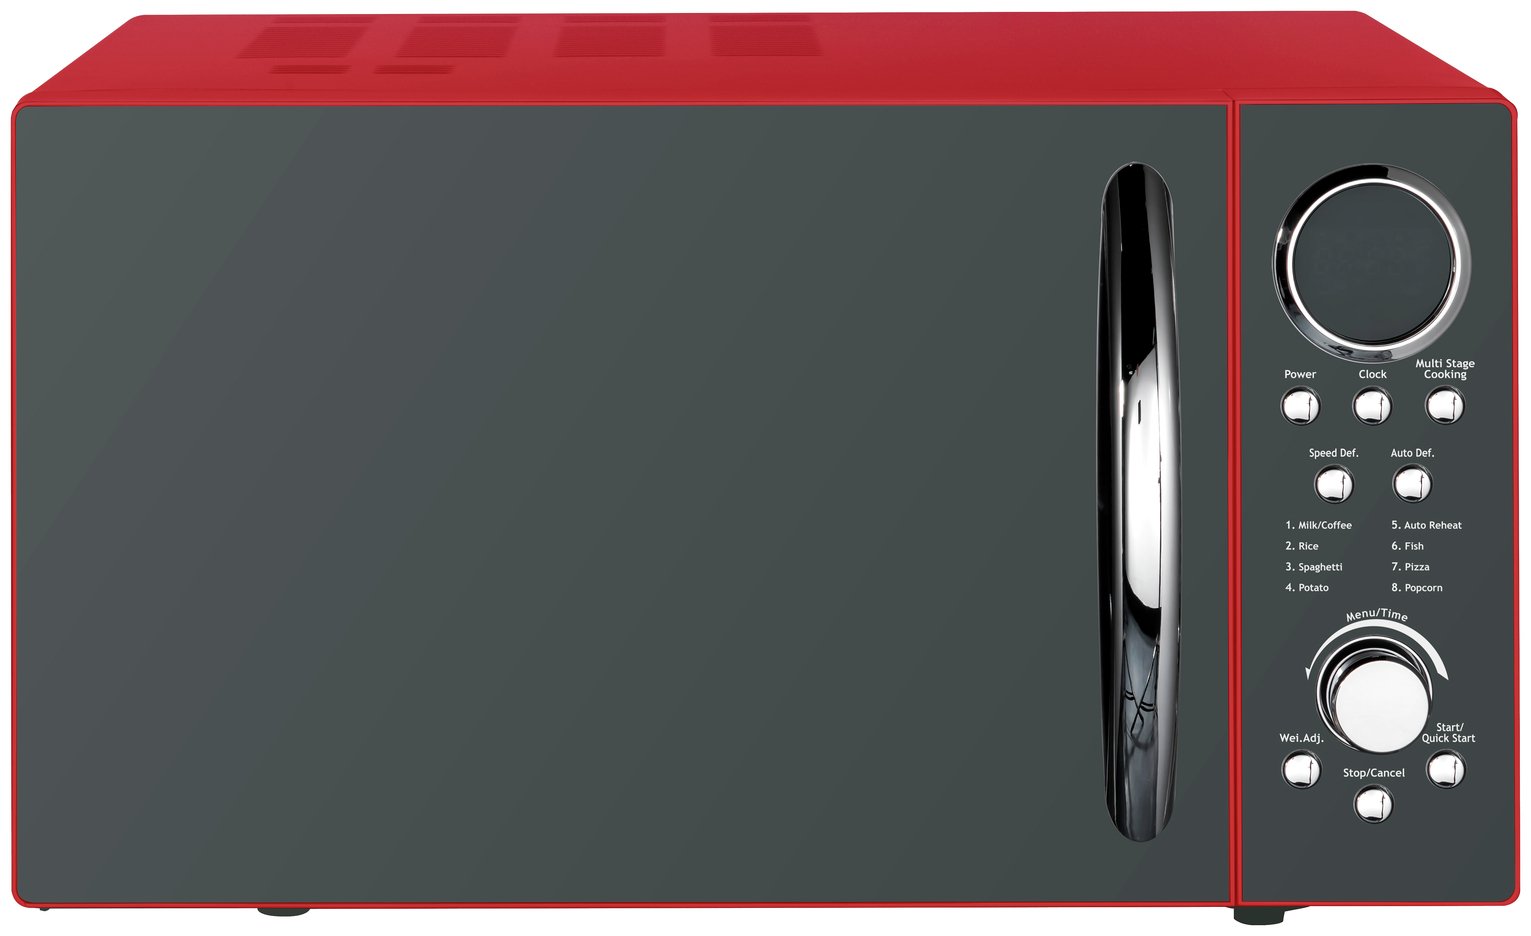 Morphy Richards 900W Standard Microwave P90D23ELB8 - Red